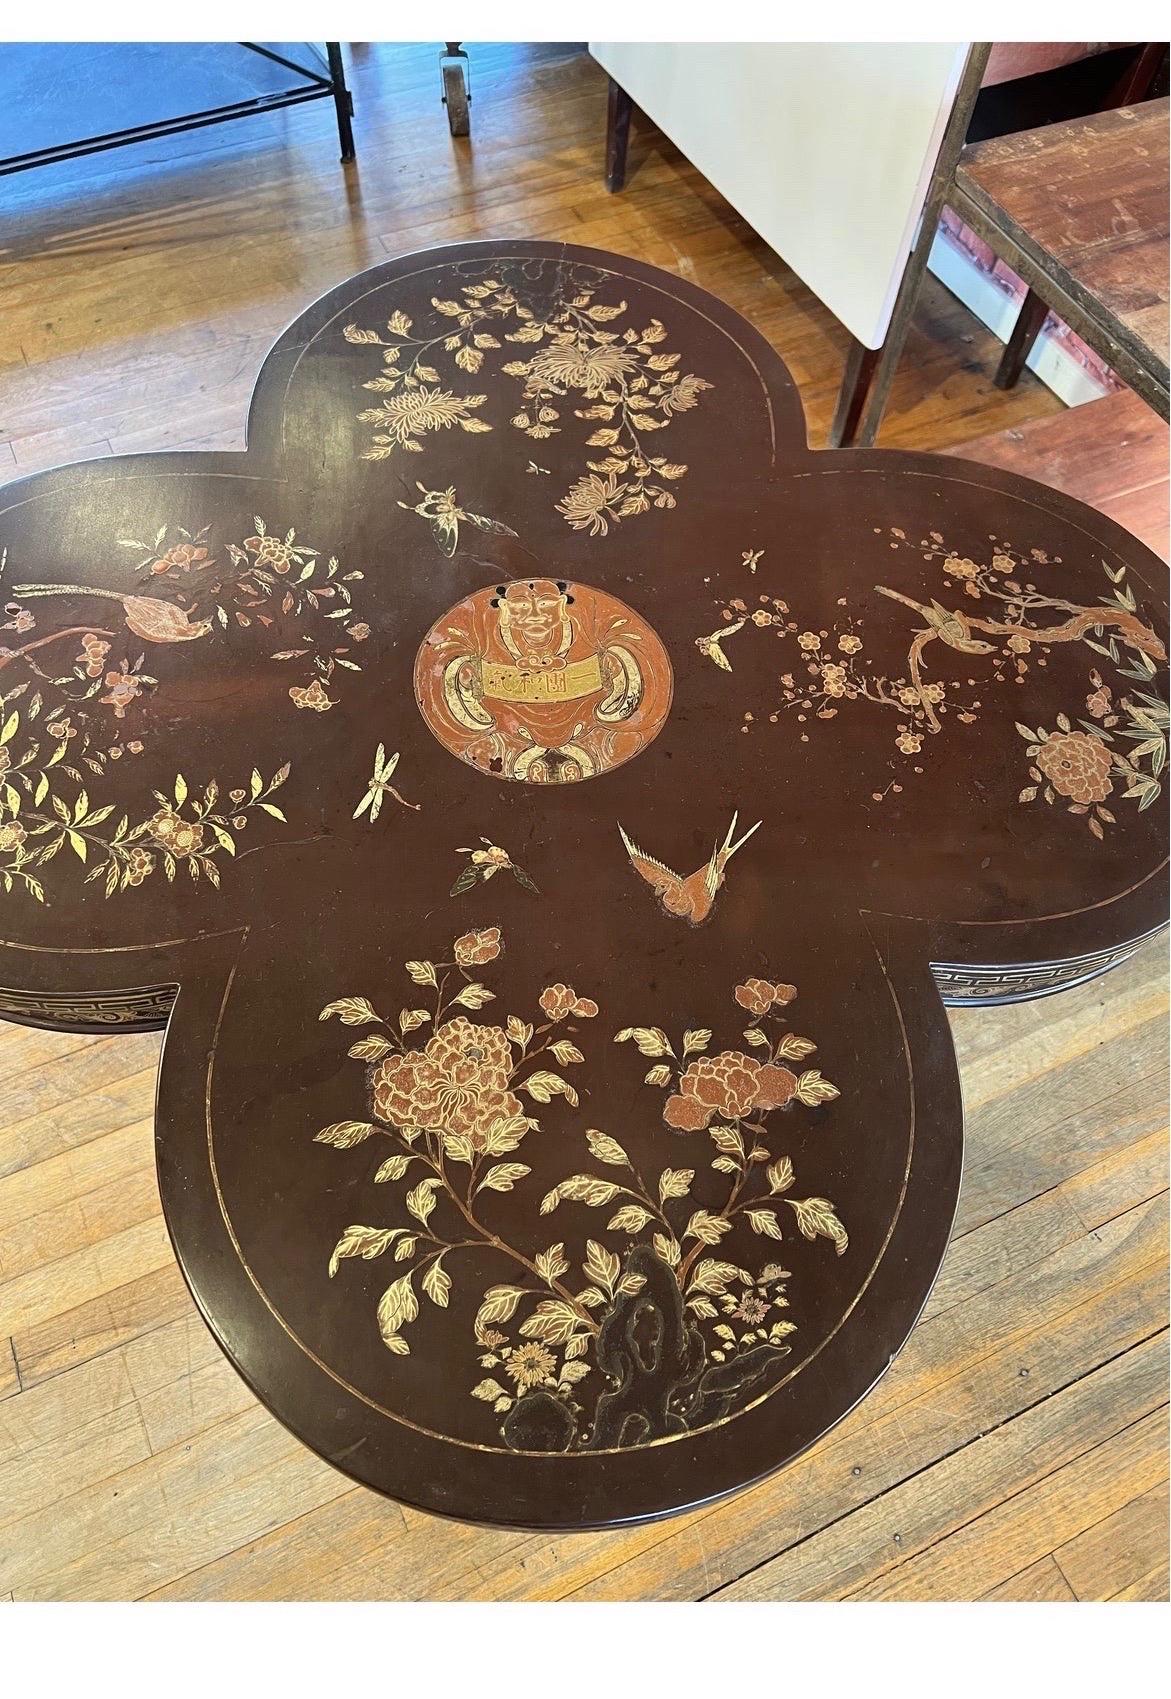 1920s, Antique English Chinoiserie Lacquer Decorated & Gilt Wood Center Table In Good Condition For Sale In Atlanta, GA